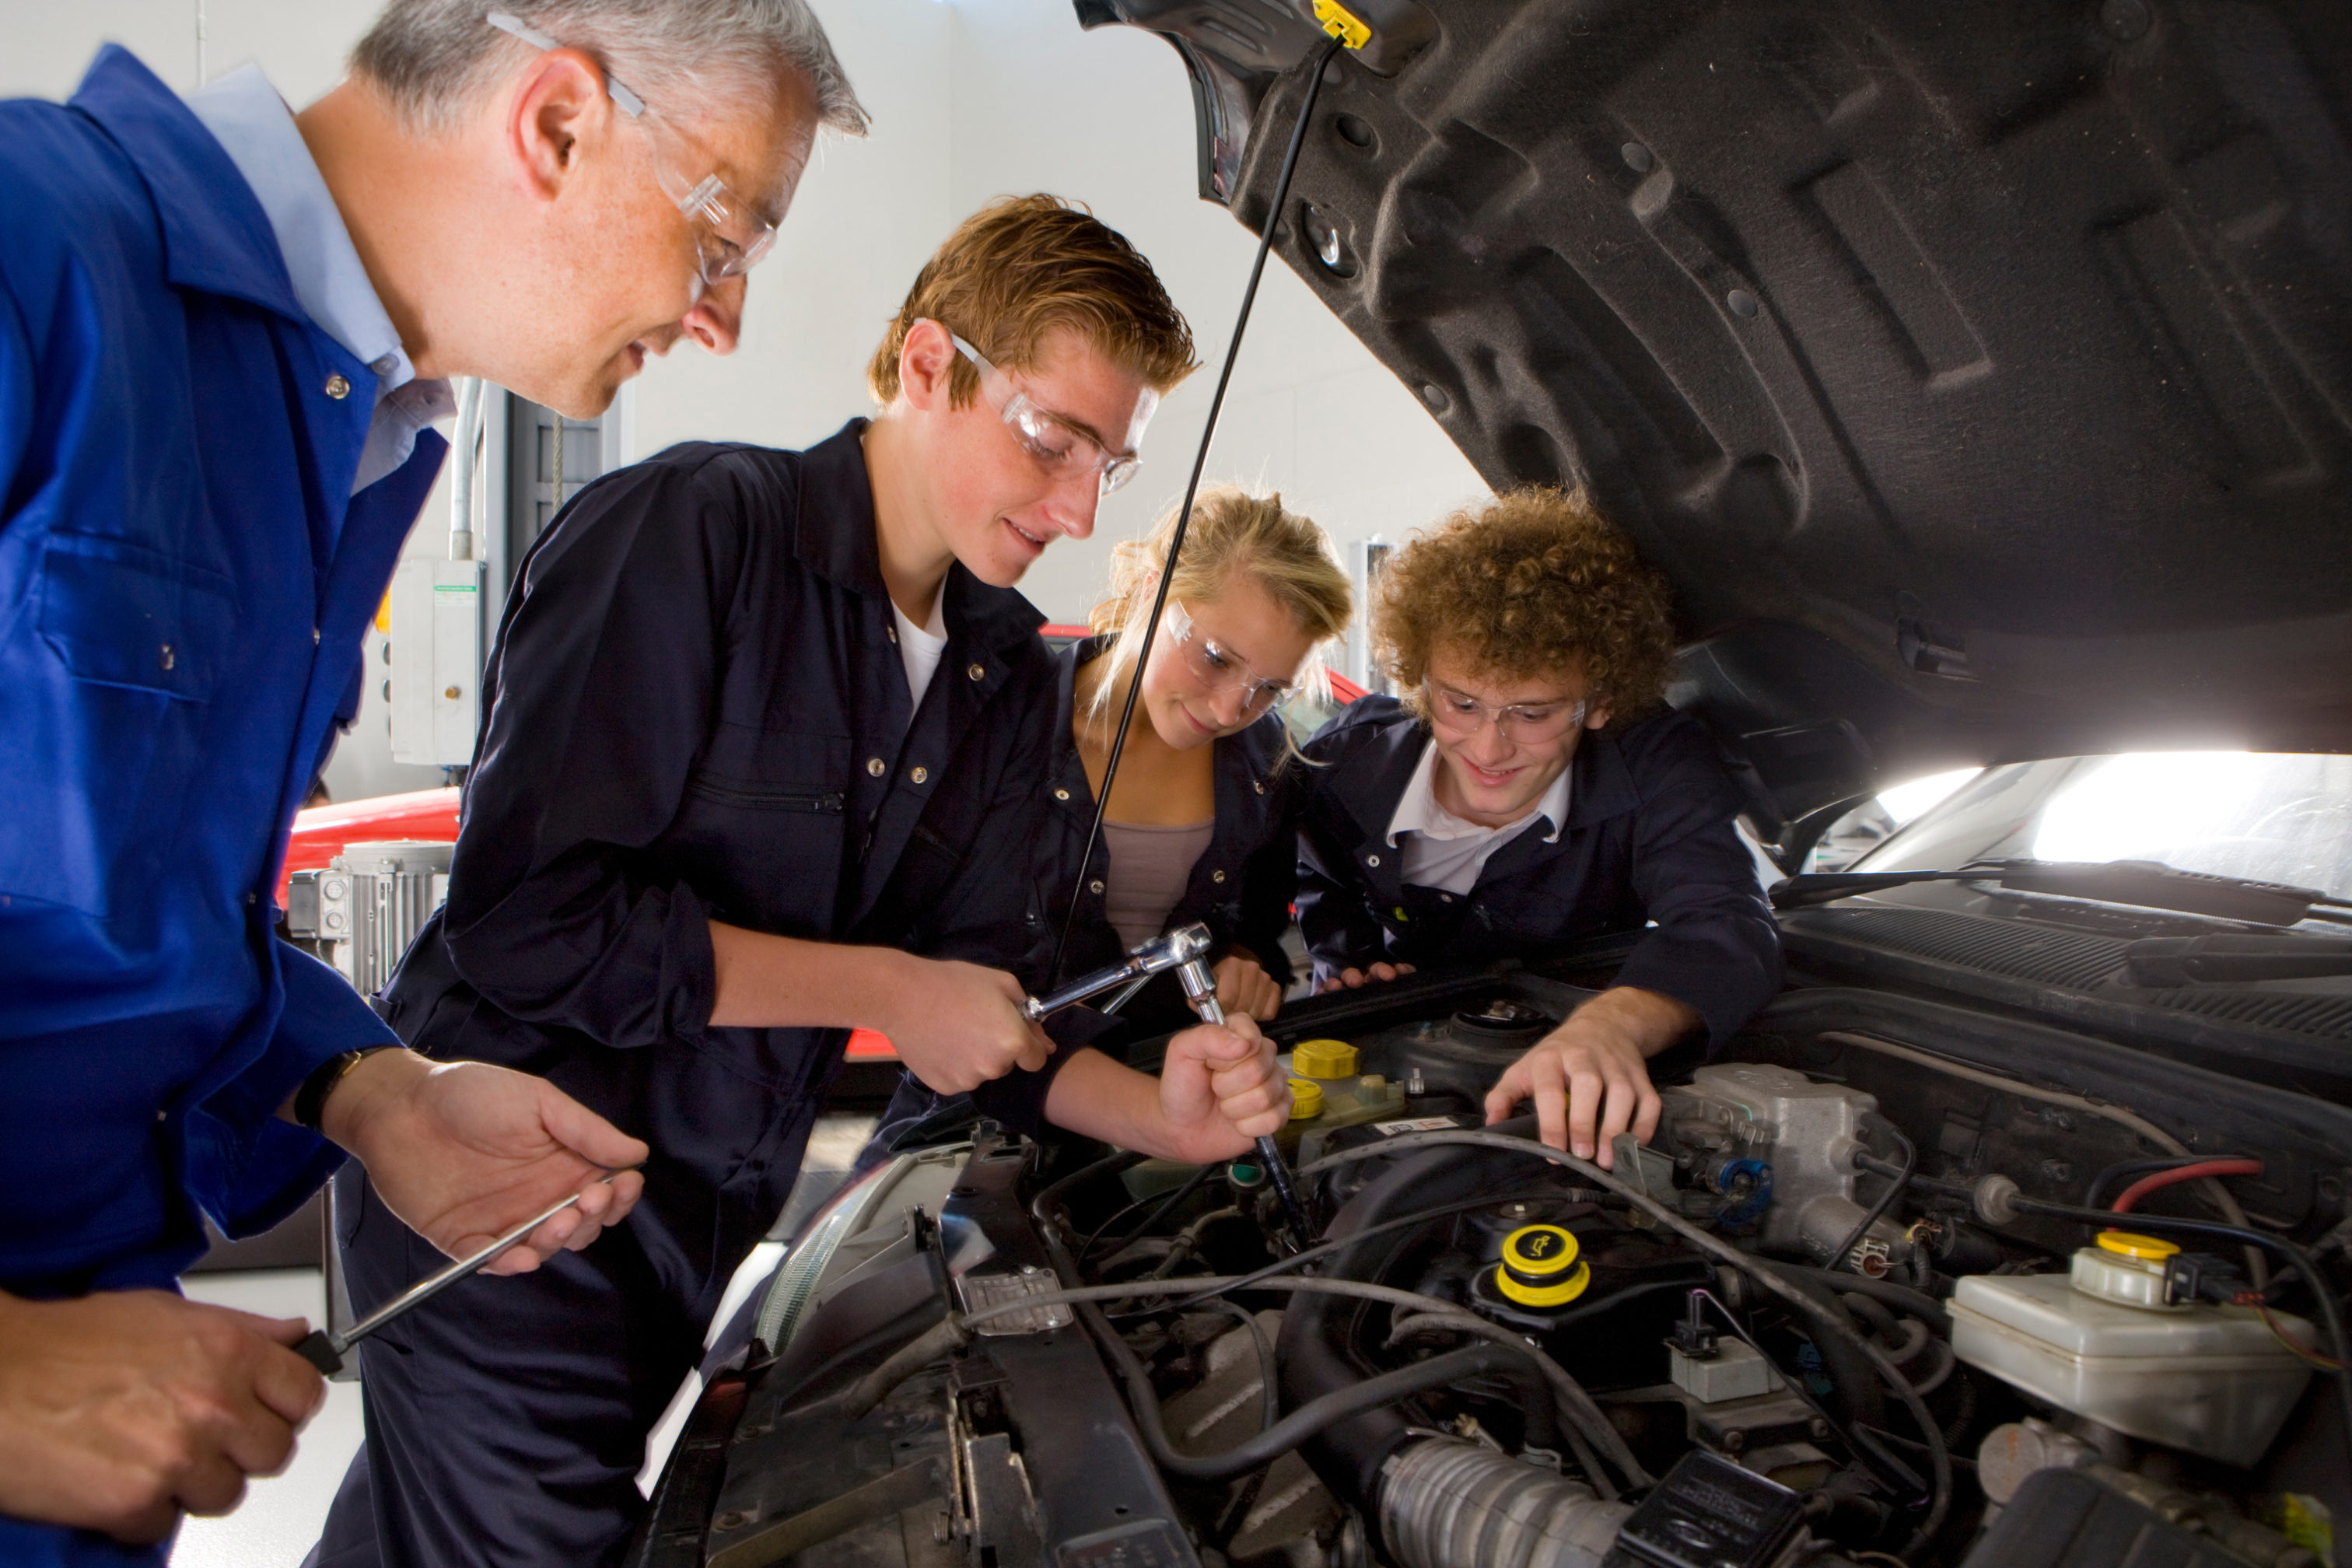 The British Columbia Institute of Technology reminds automotive service providers in British Columbia that co-op students will soon be available for hiring.